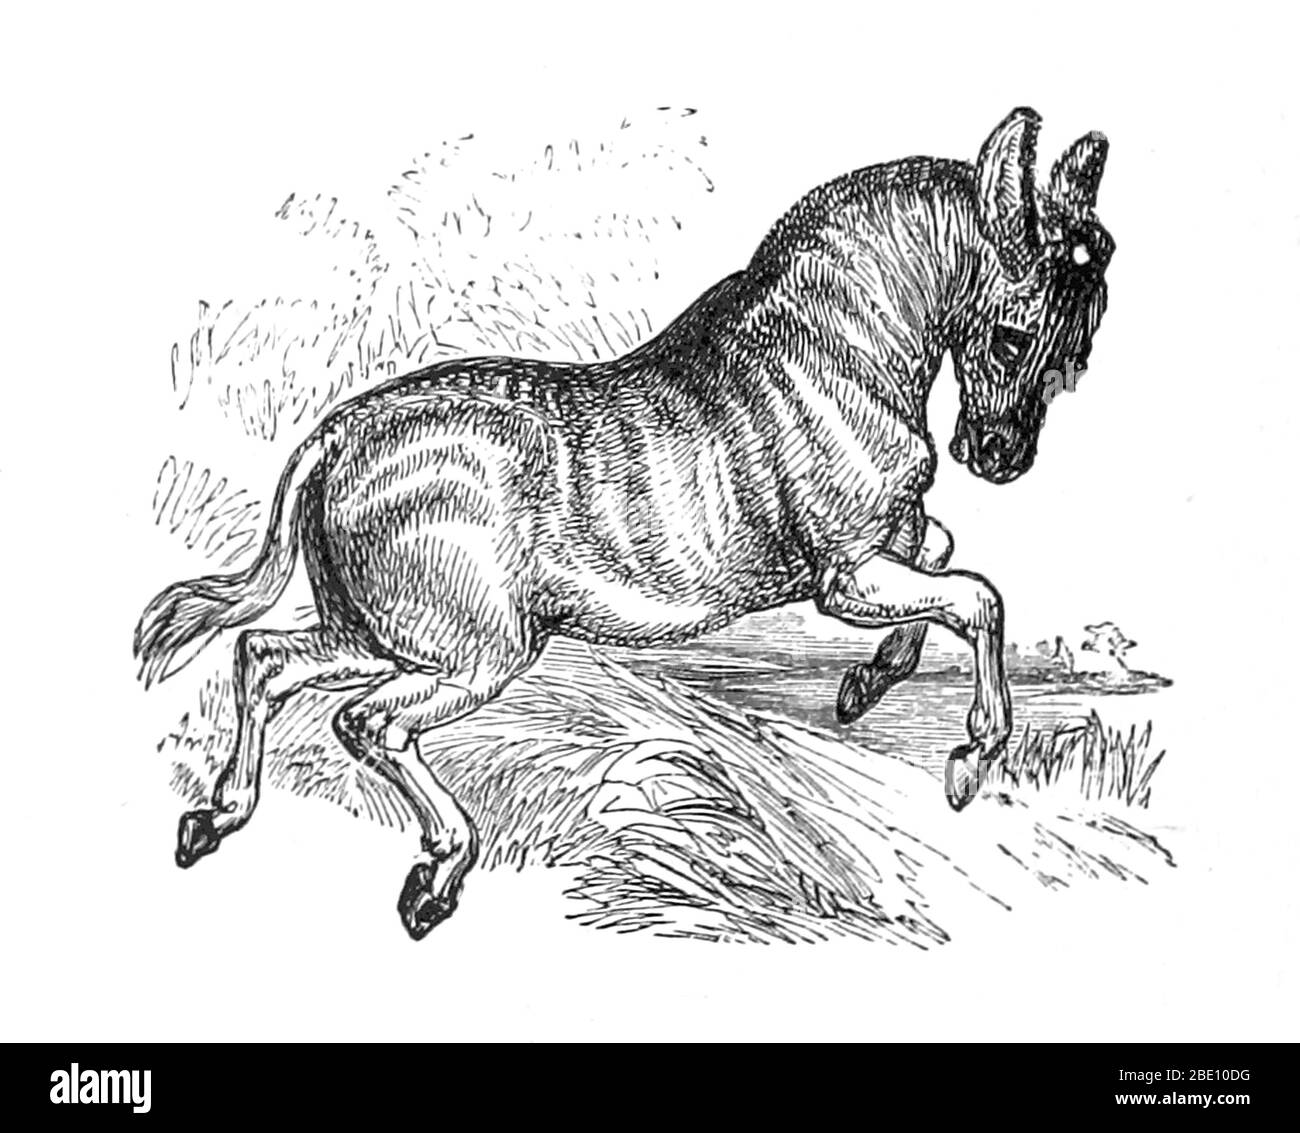 An illustration from 1874 of a quagga. Quagga (Equus quagga quagga) is an extinct subspecies of the plains zebra that lived in South Africa until the nineteenth century. It was long thought to be a distinct species, but genetic studies have shown it to be the southernmost subspecies of the plains zebra. It is considered particularly close to Burchell's zebra. Its name is derived from its call, which sounds like 'kwa-ha-ha'. The last captive specimen died in Amsterdam on 12 August 1883. In 1984, the quagga was the first extinct animal to have its DNA analysed, and the Quagga Project is trying t Stock Photo